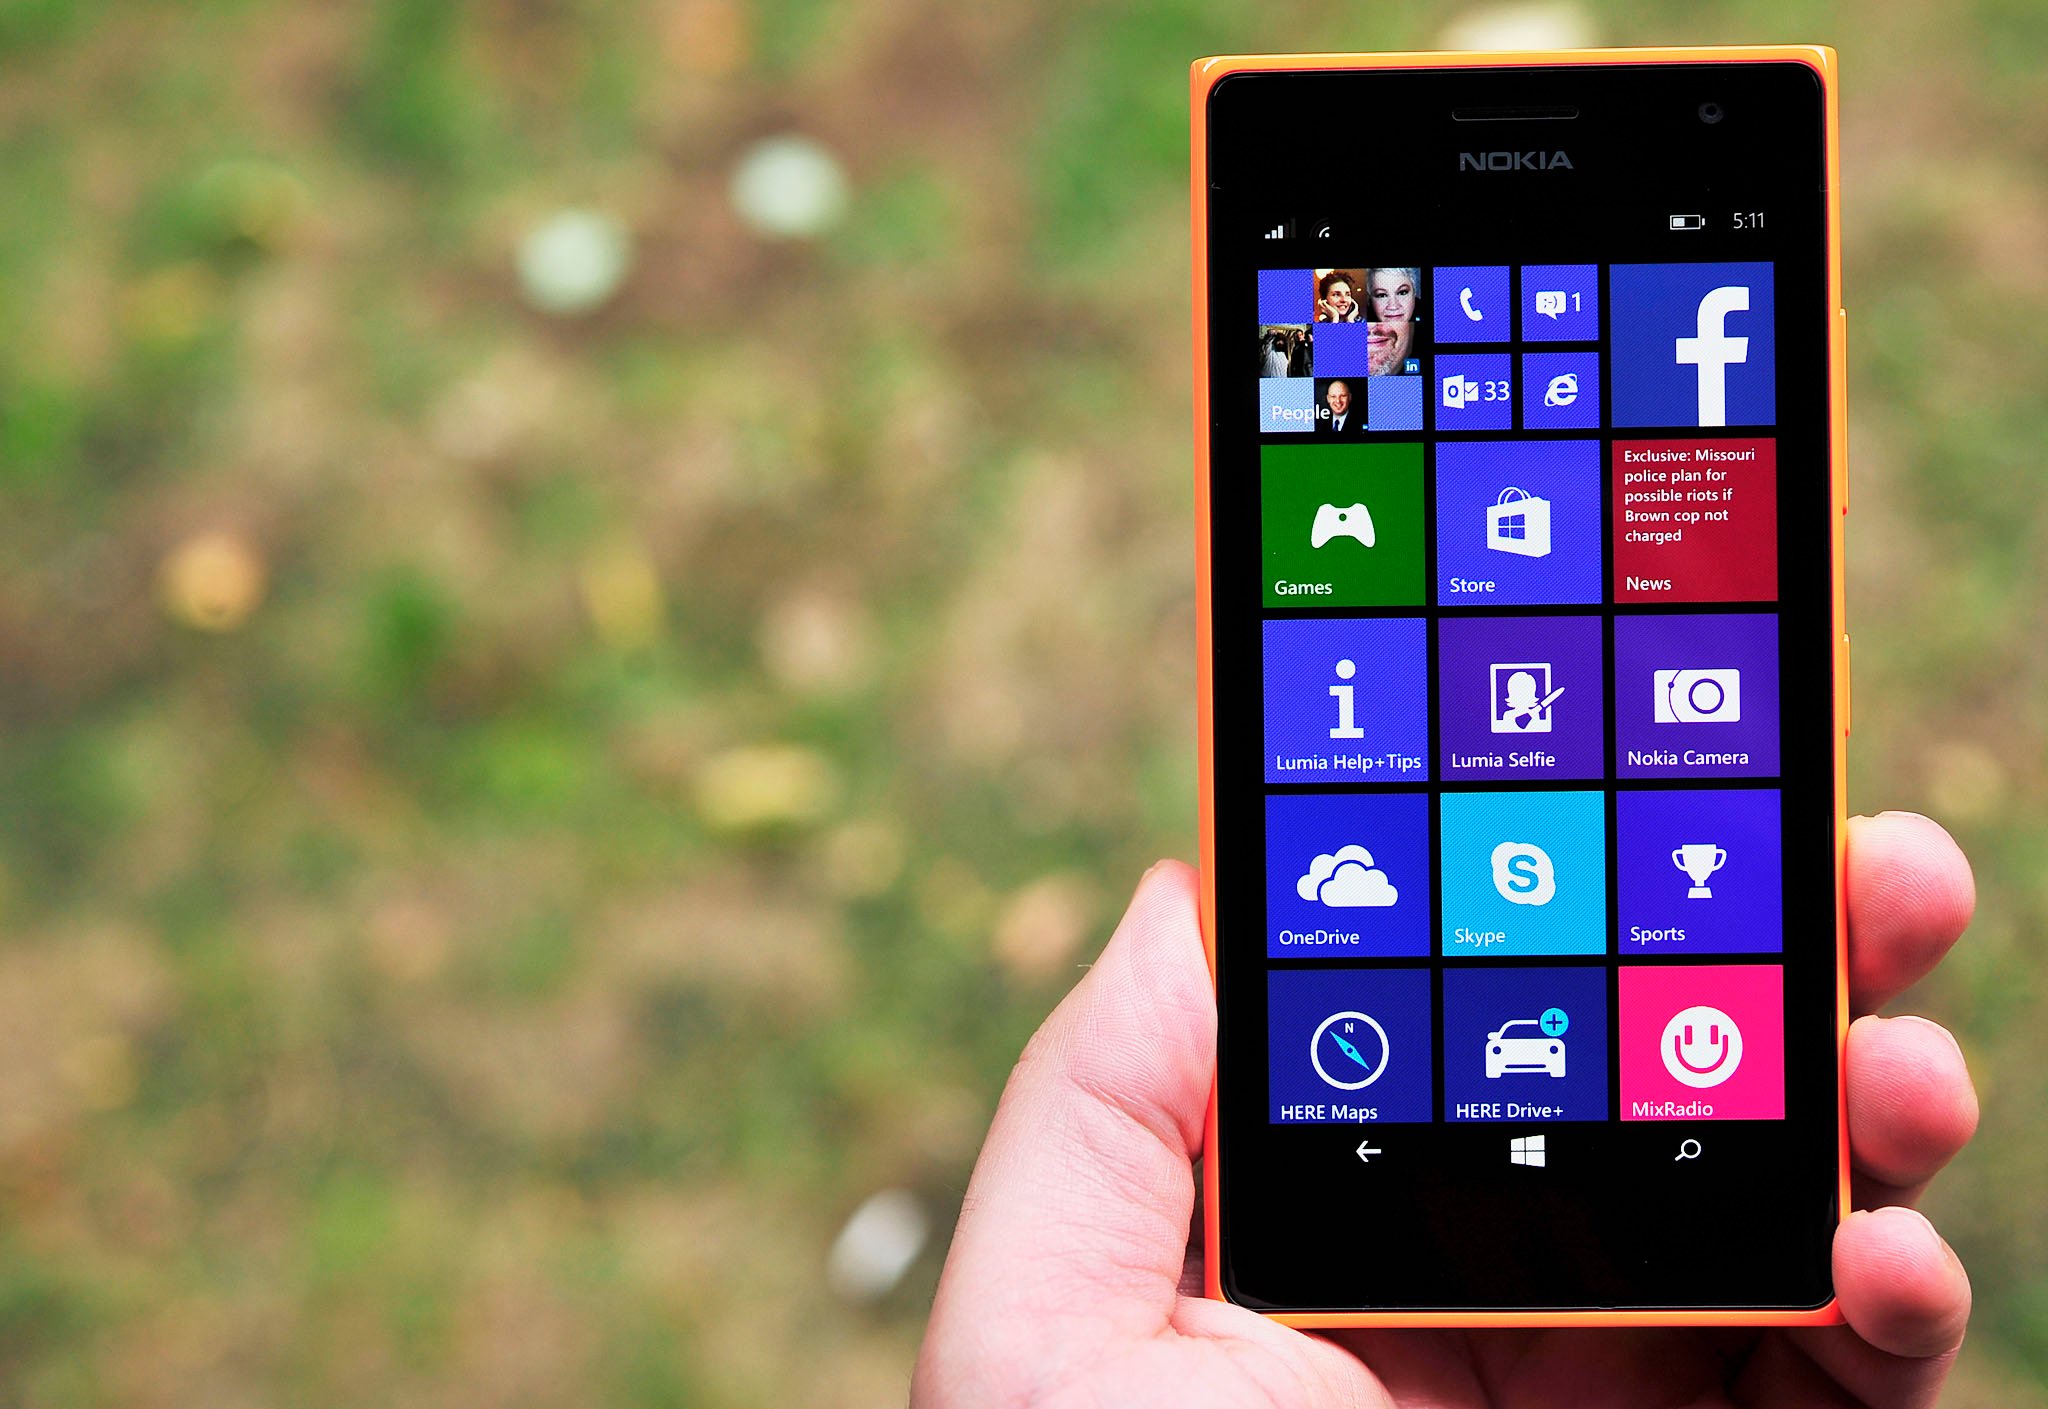 Nokia Lumia 735 unboxing and first impressions - YouTube